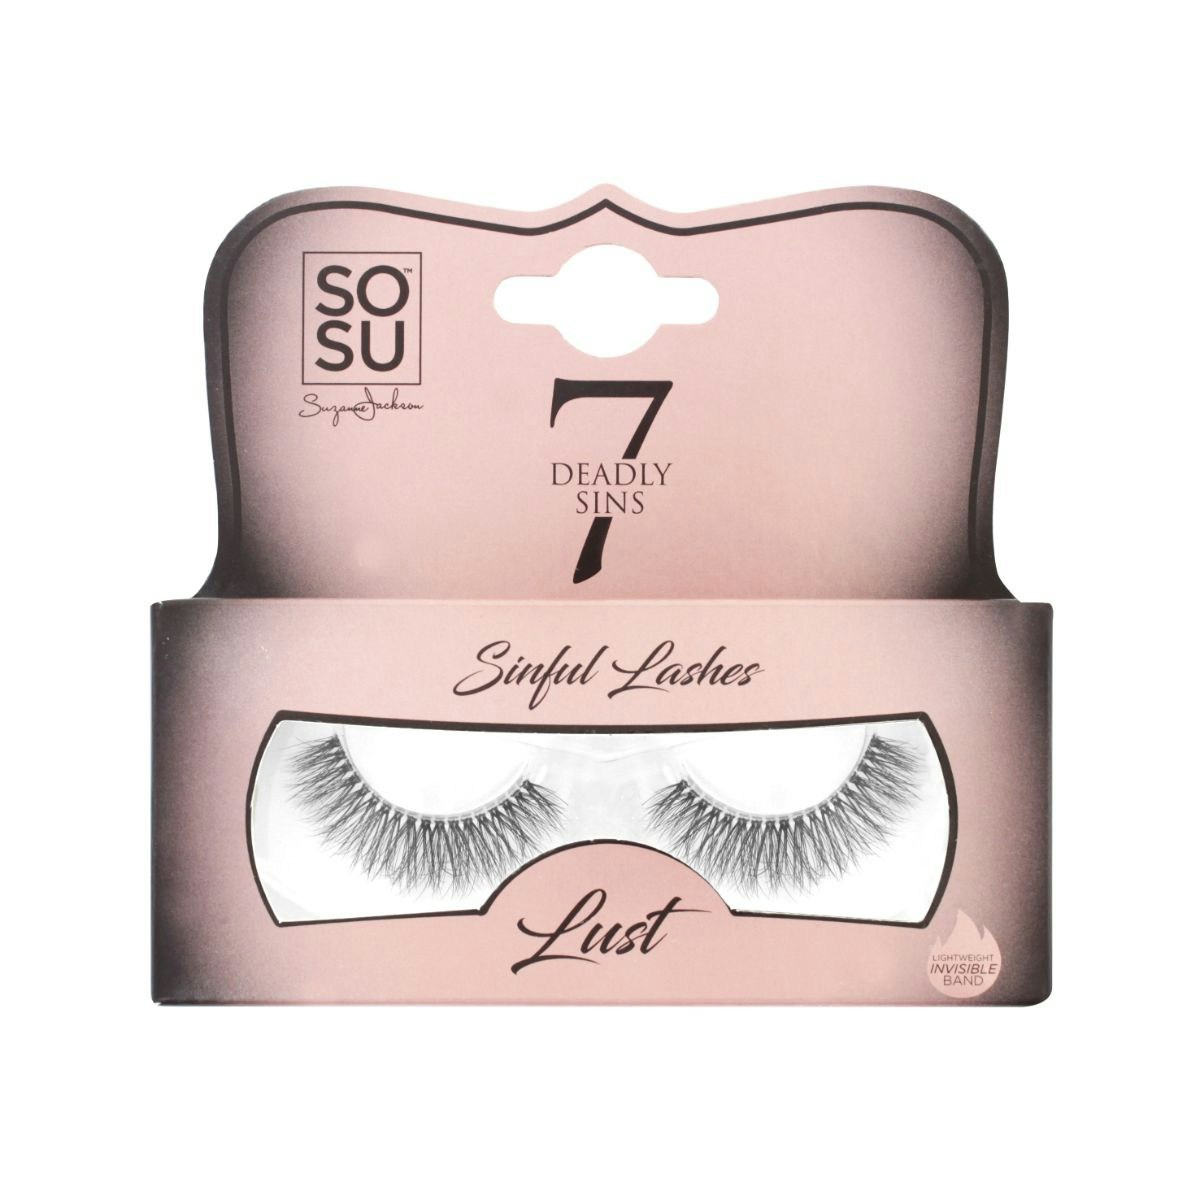 Sosu By Suzanne Jackson Sosu By Suzanne Jackson 7 Deadly Sins Lashes - Lust